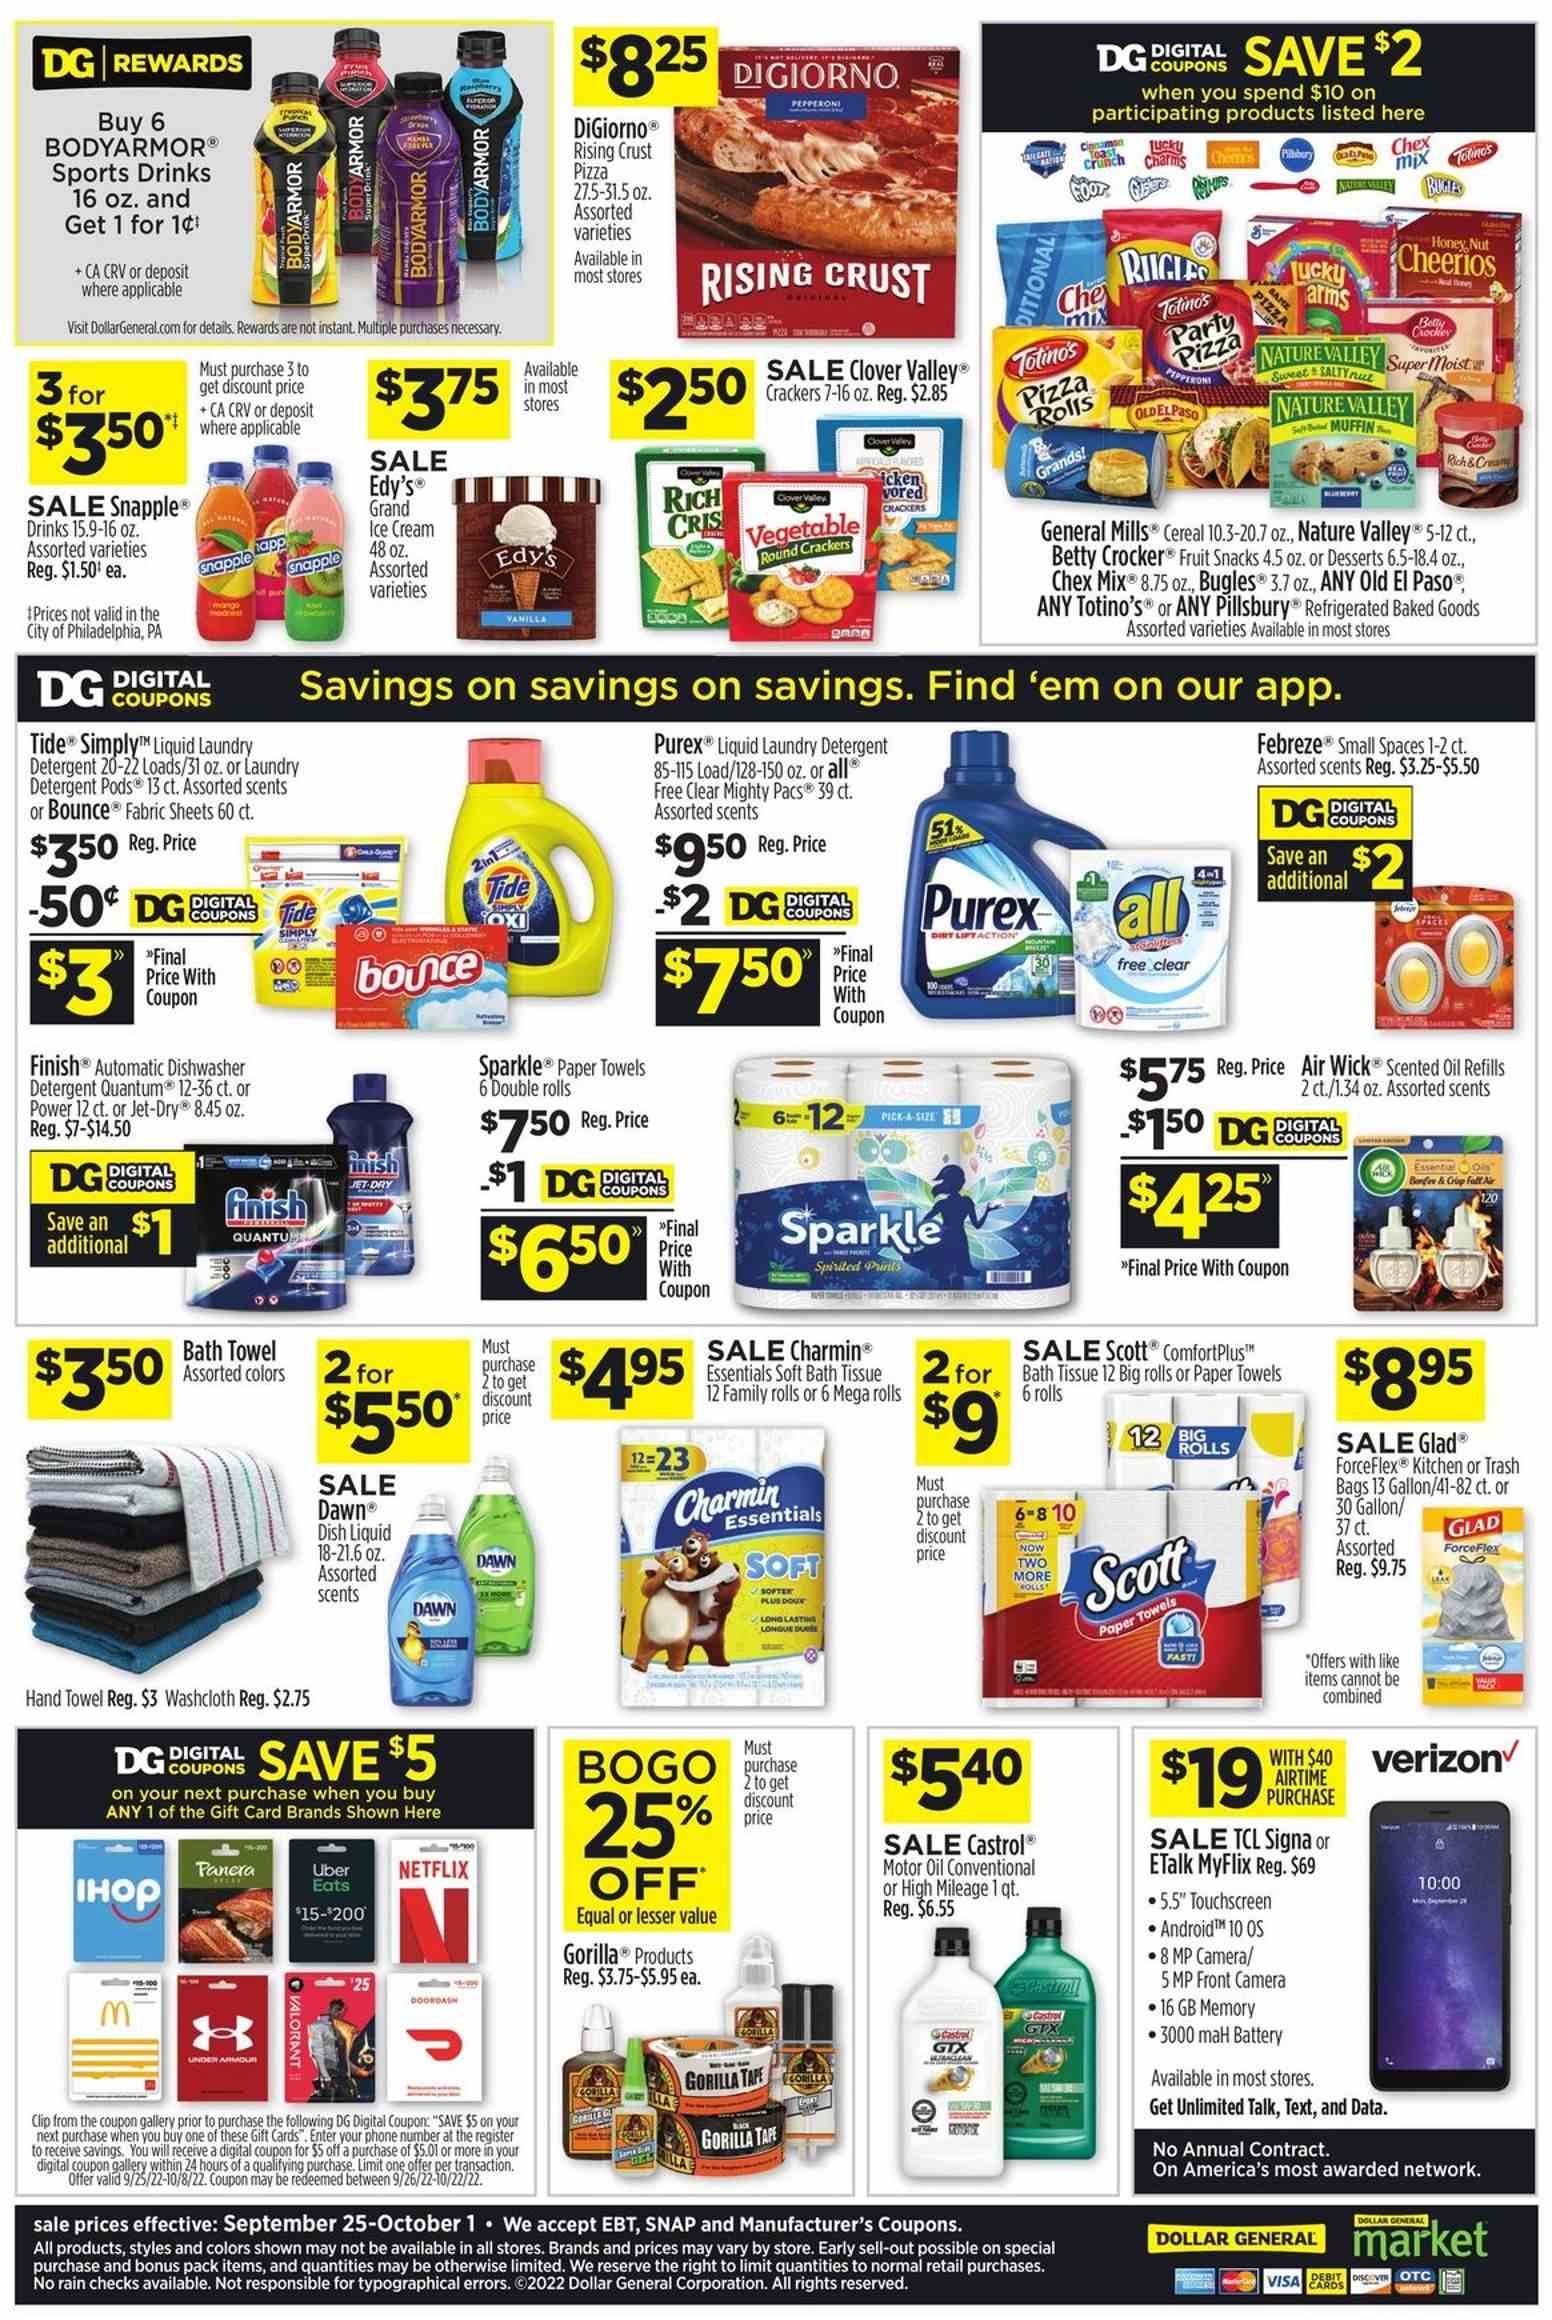 thumbnail - Dollar General Flyer - 09/25/2022 - 10/01/2022 - Sales products - Scott, Under Armour, pizza rolls, Old El Paso, muffin, mango, pizza, Pillsbury, pepperoni, Clover, ice cream, crackers, fruit snack, Chex Mix, cereals, Cheerios, Nature Valley, cinnamon, oil, Snapple, bath tissue, kitchen towels, paper towels, Charmin, detergent, Febreze, Tide, laundry detergent, Bounce, Purex, dishwashing liquid, Jet, trash bags, Air Wick, scented oil, bath towel, washcloth, hand towel, TCL, motor oil, Castrol. Page 2.